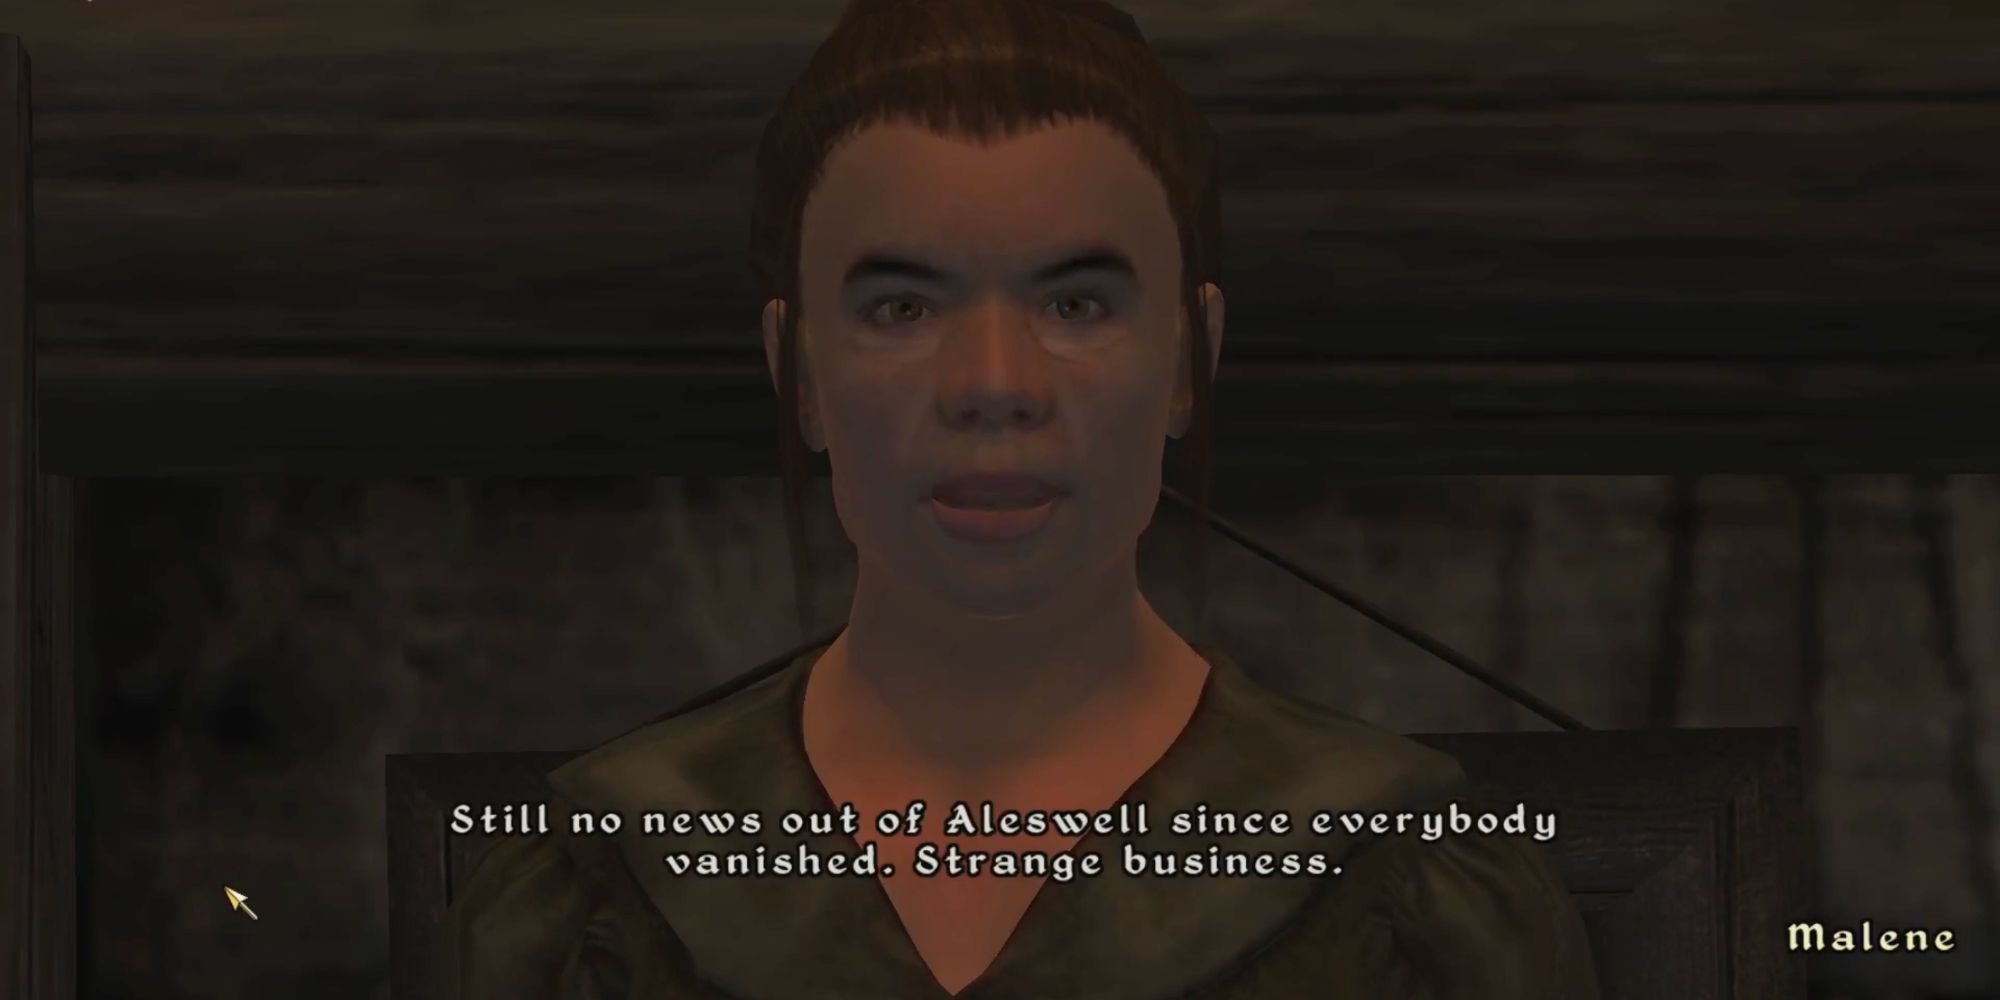 A screenshot of Oblivion, showing the innkeeper Malene telling the player about the disappearance of the villagers in Aleswell